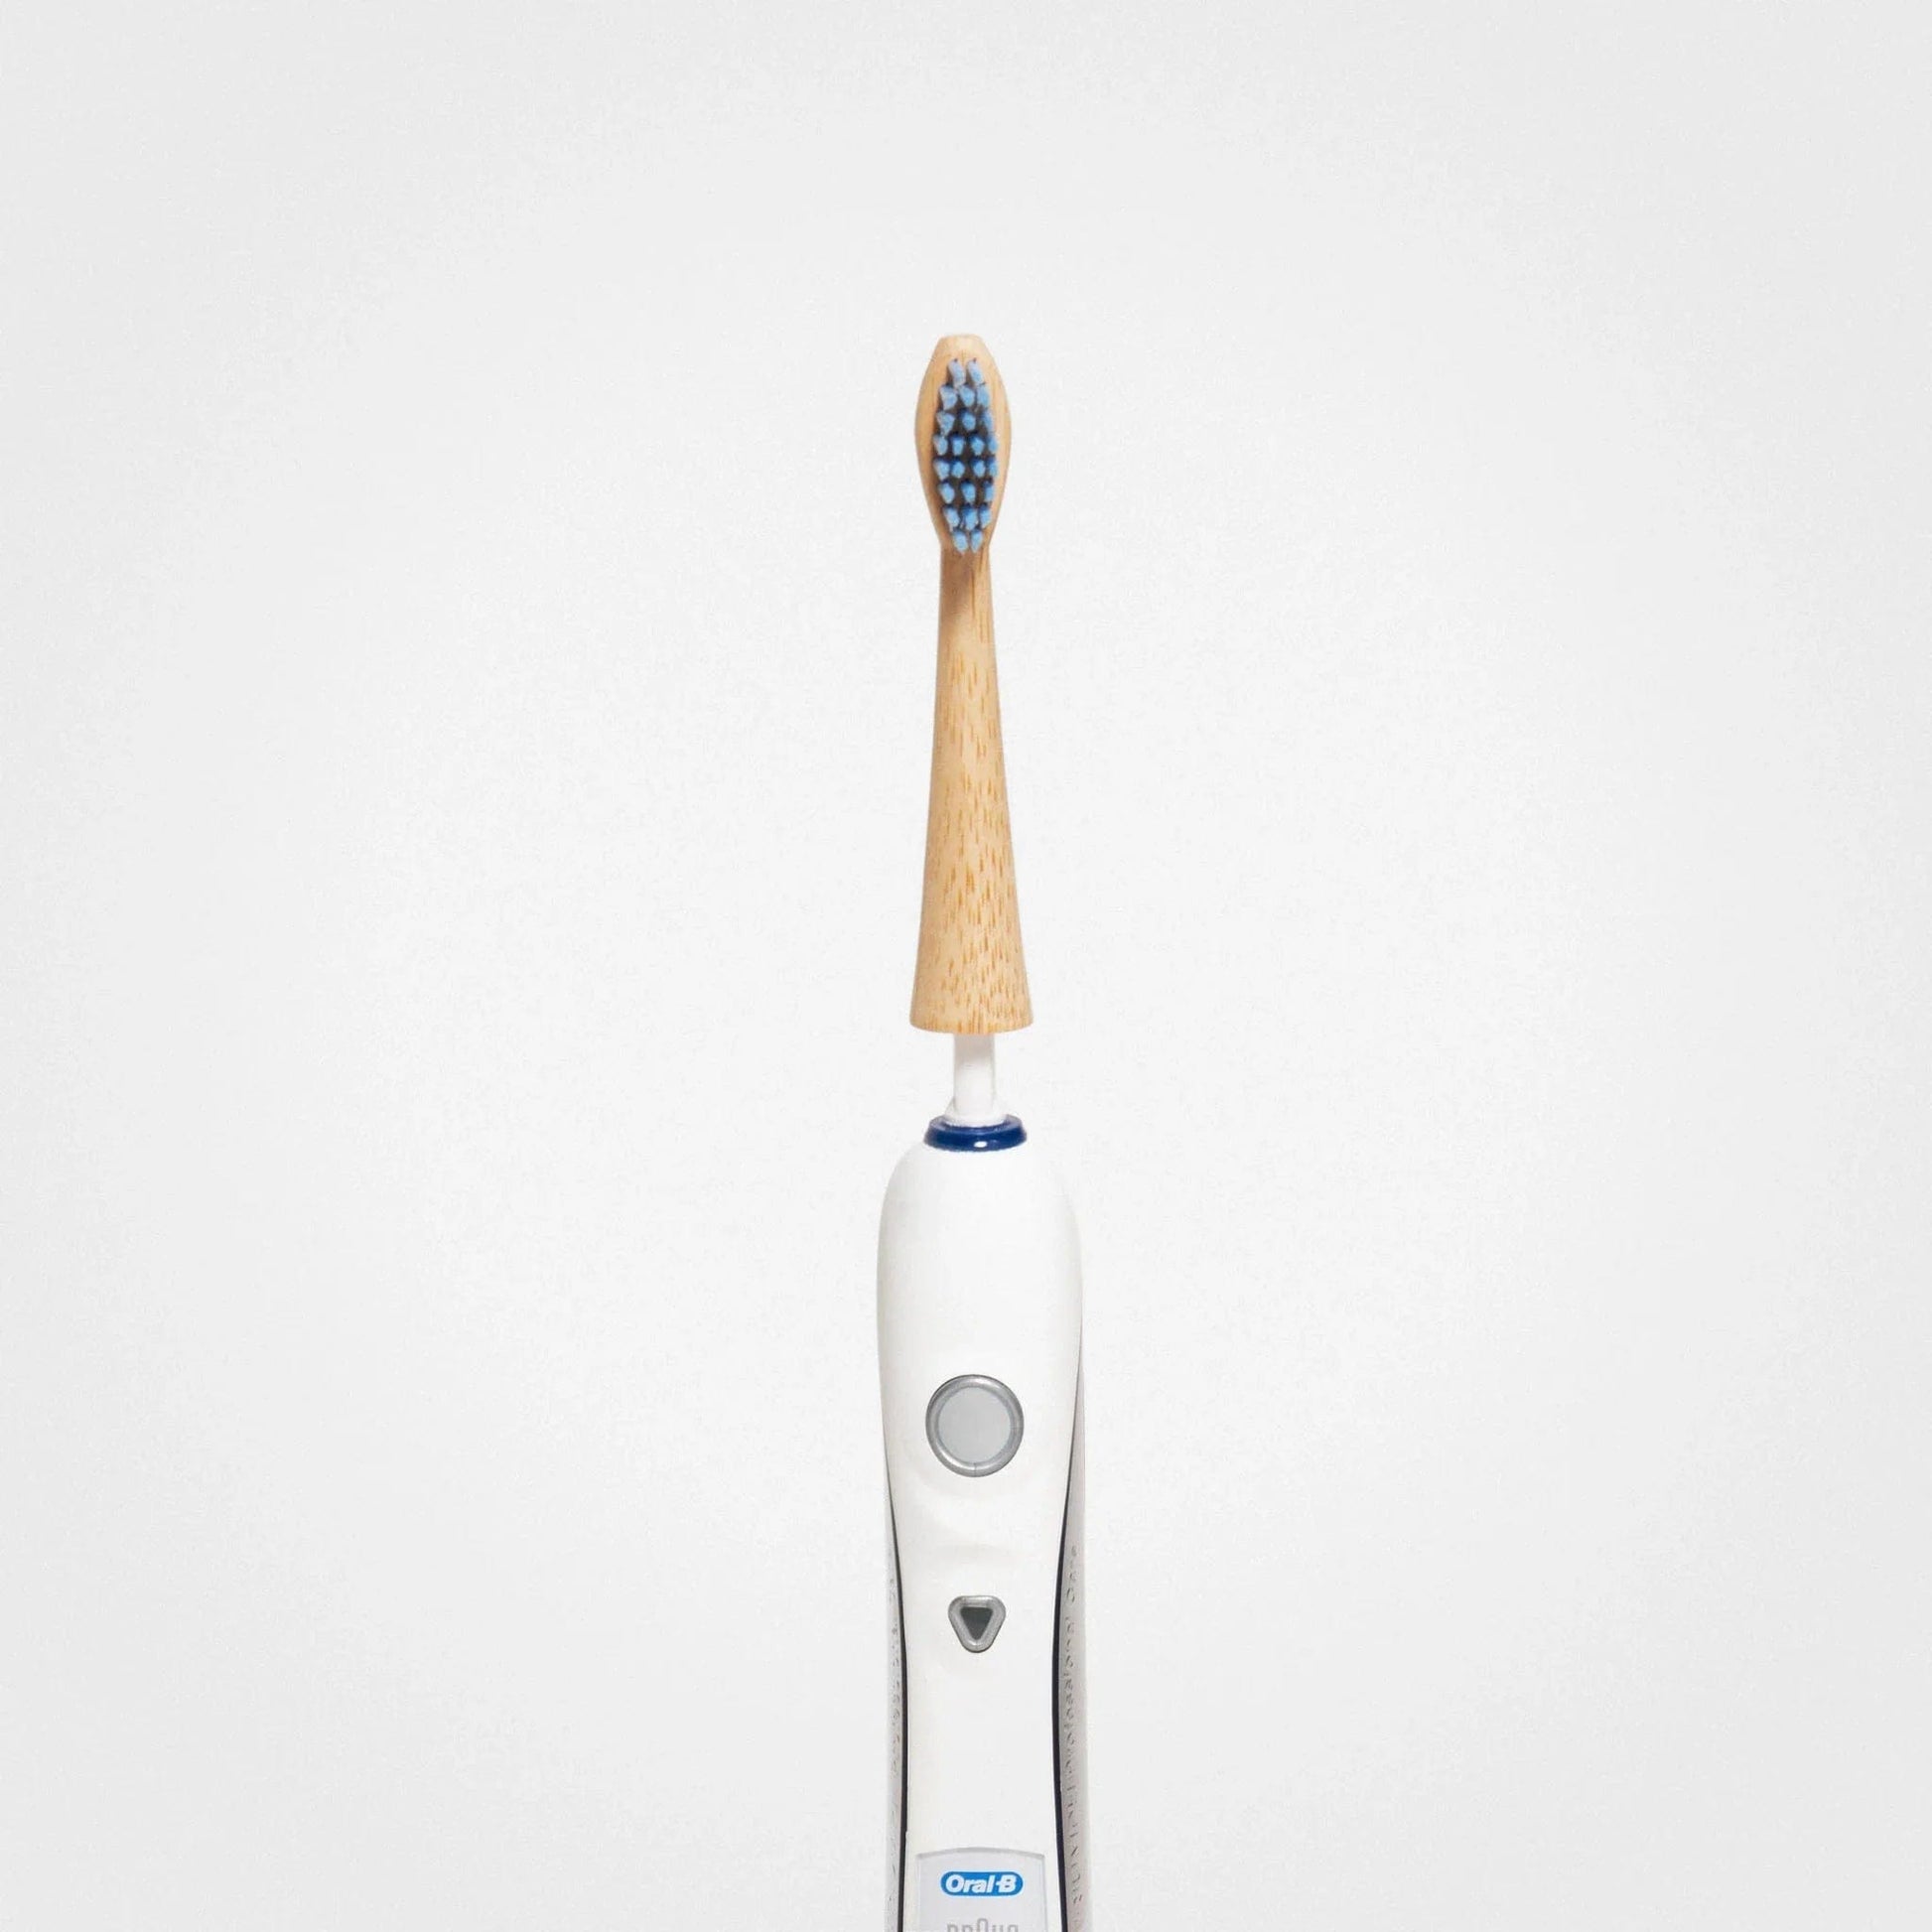 Electric Toothbrush Bamboo Heads (4-Pack) – ELIMS